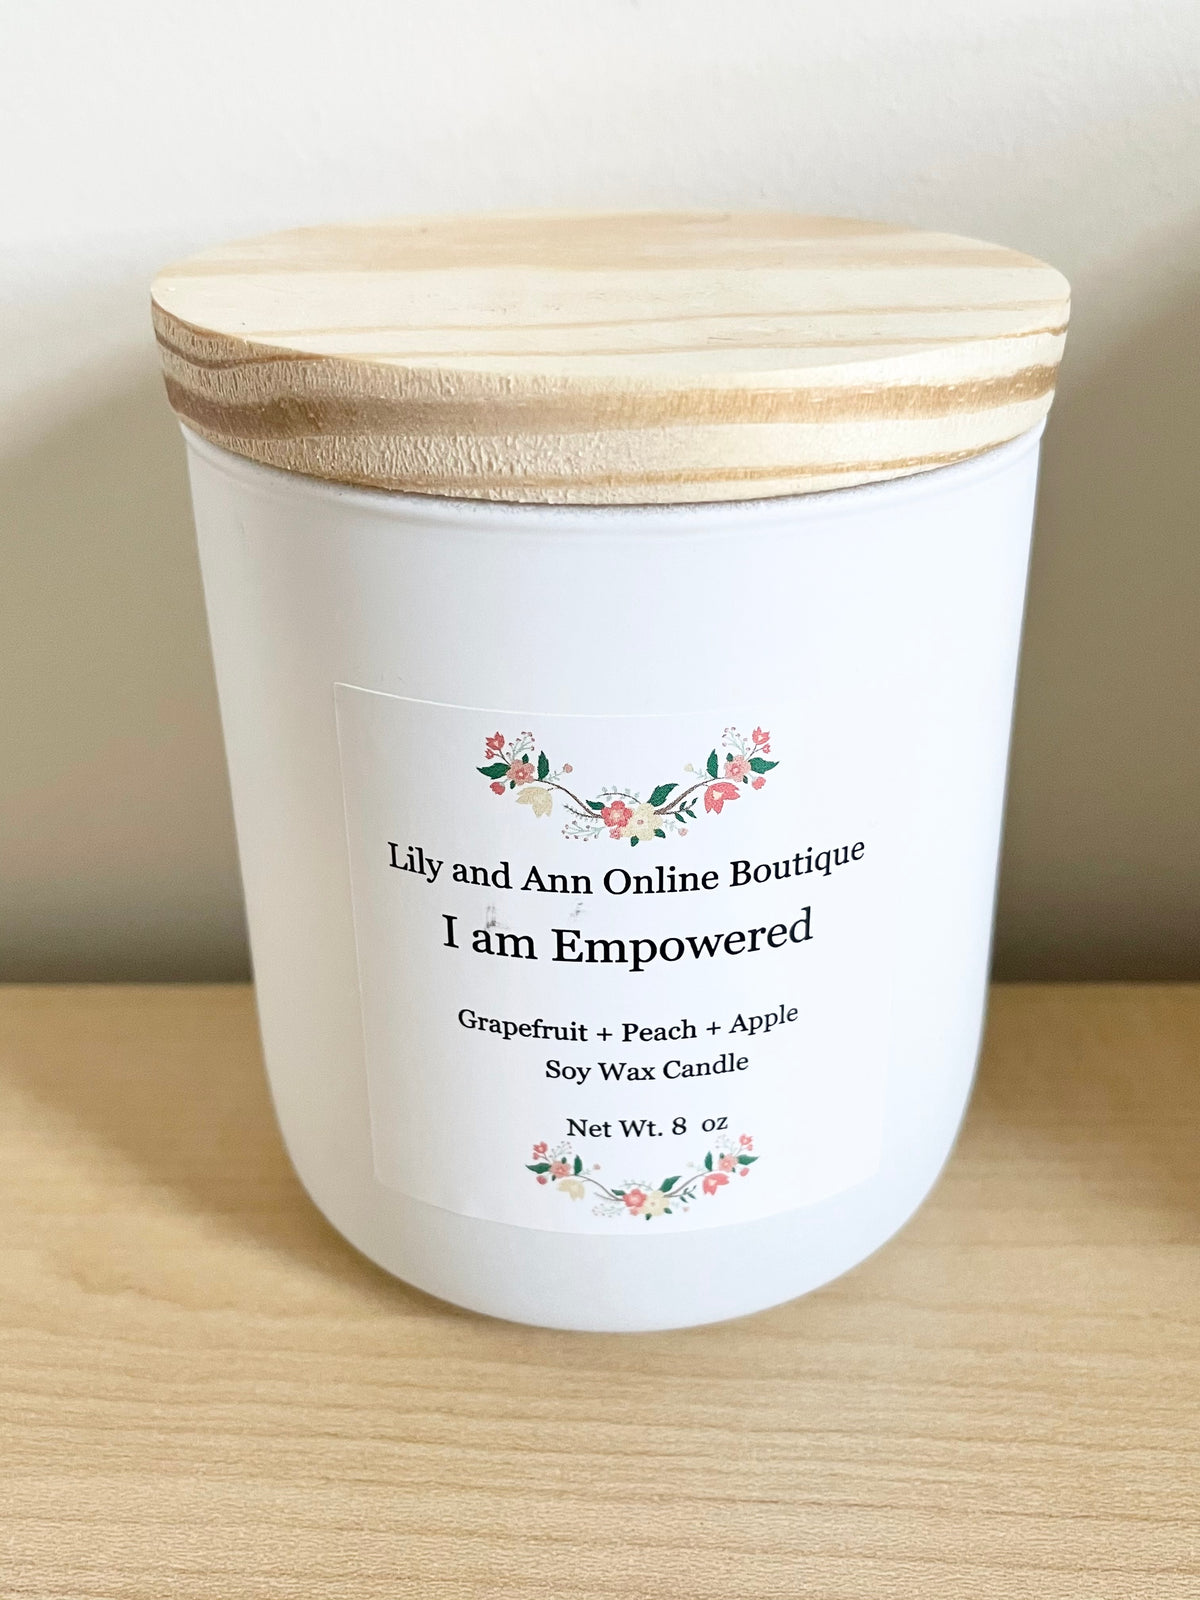 I am Empowered Candle - Lily And Ann Online Boutique